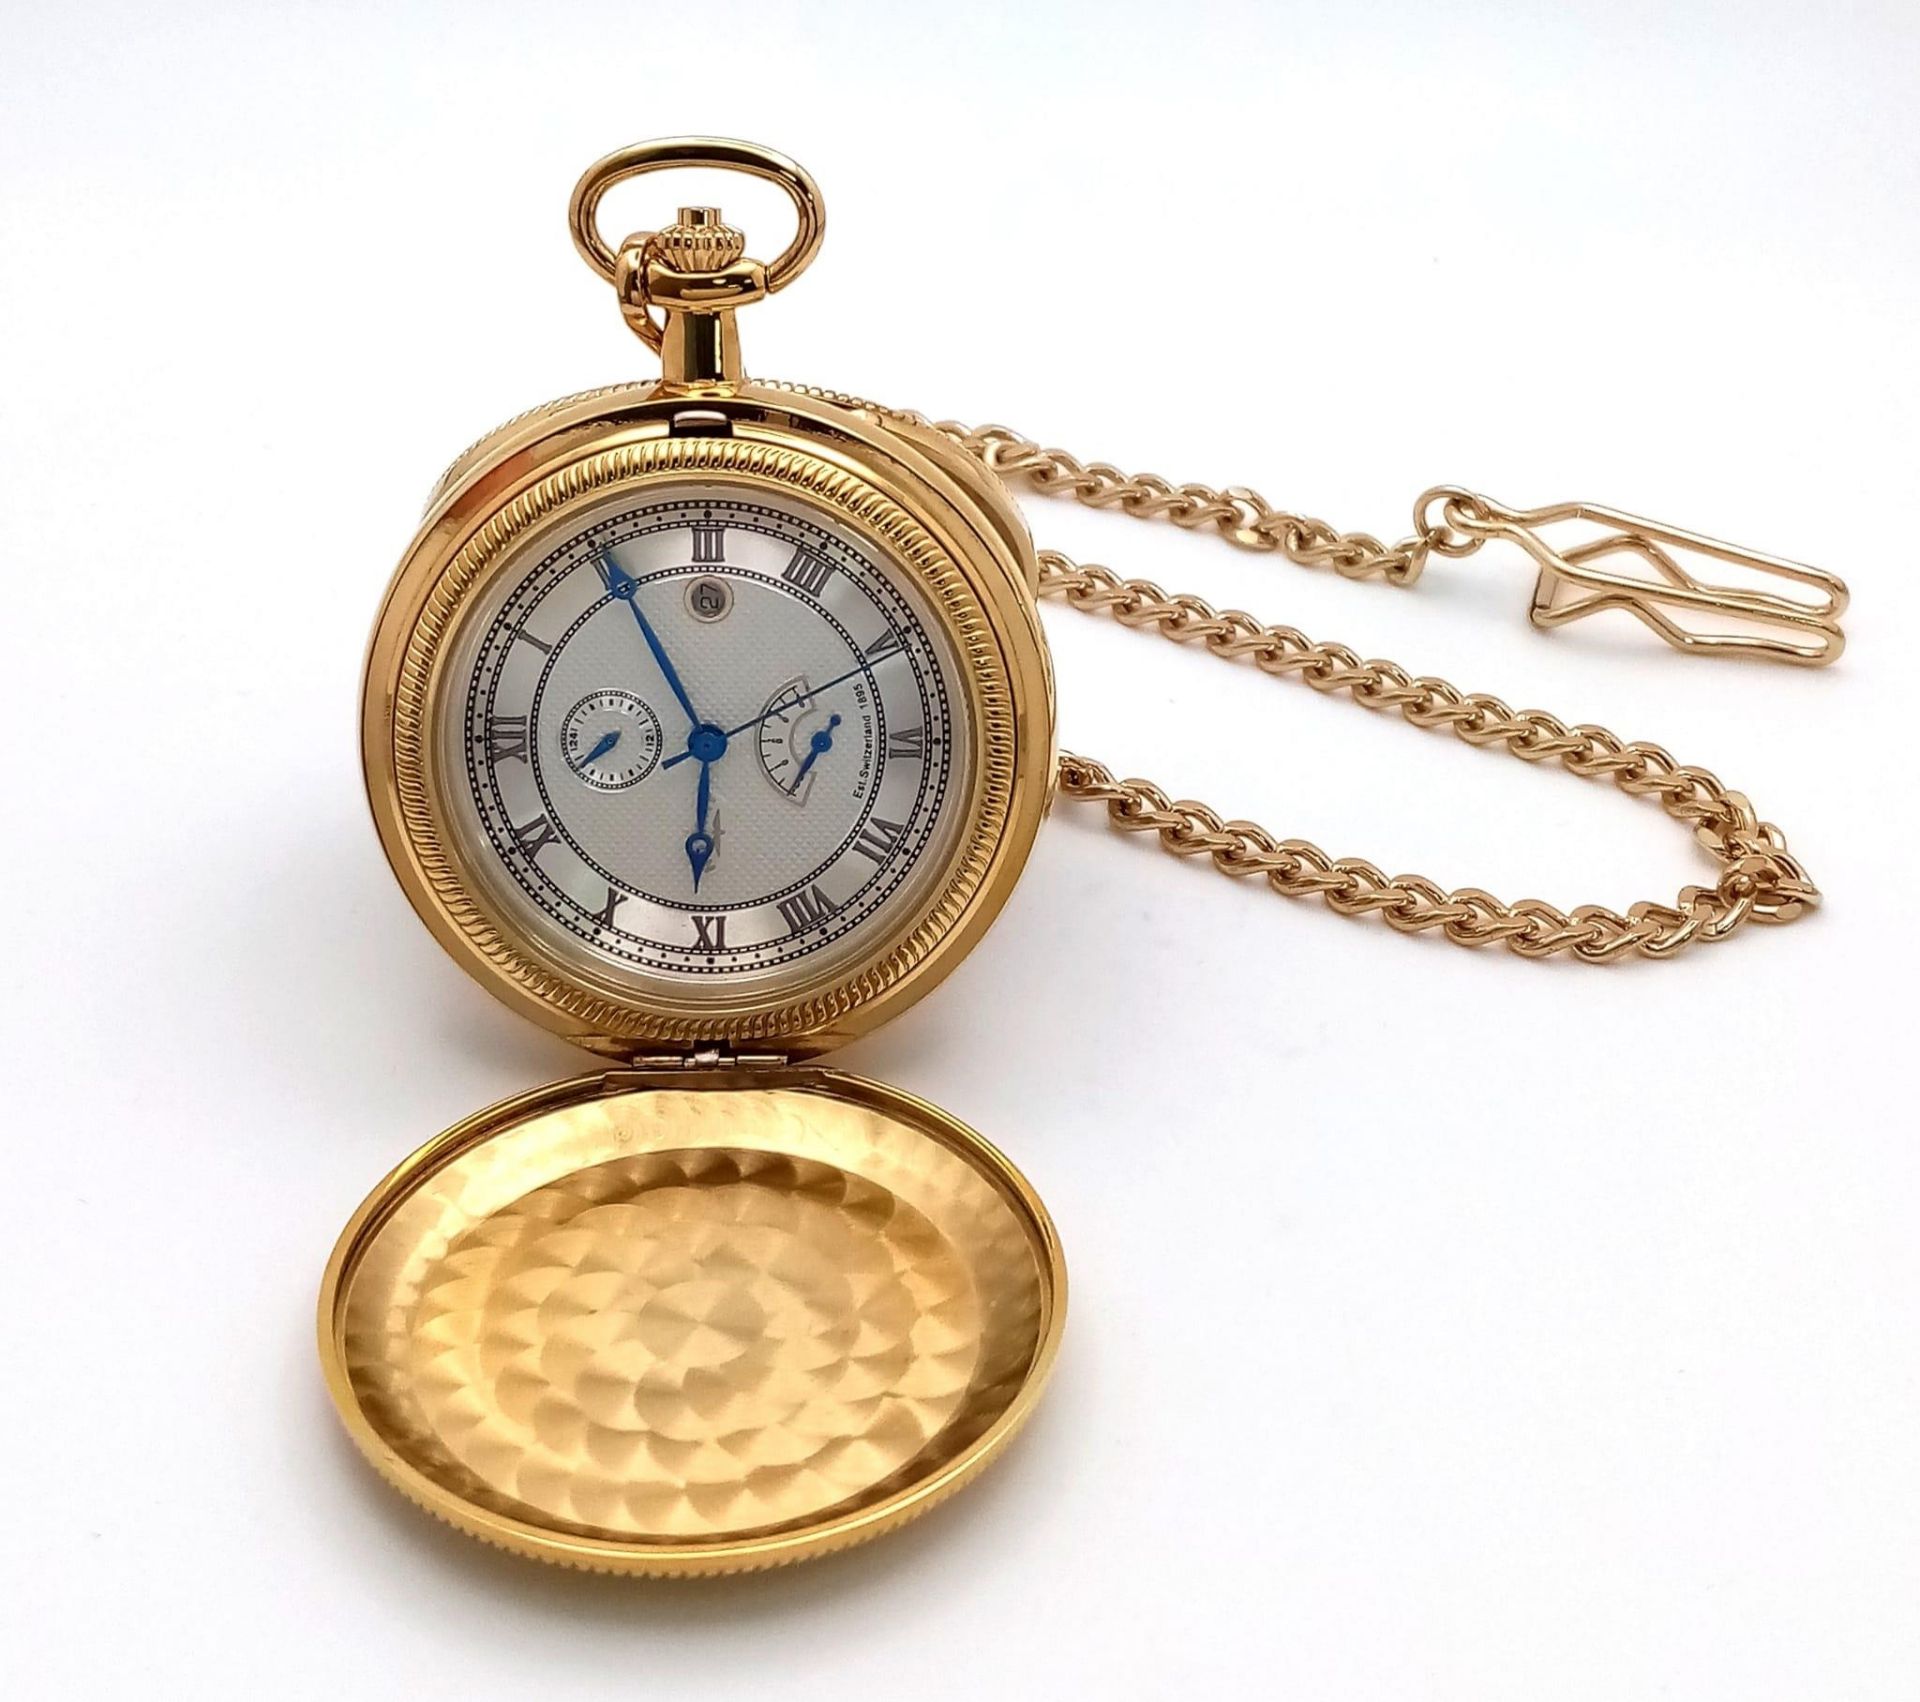 An Unworn Gold Plated Rotary Manual Wind Pocket, Date Watch. 4 Day Power Reserve. With Albert Chain. - Image 2 of 8